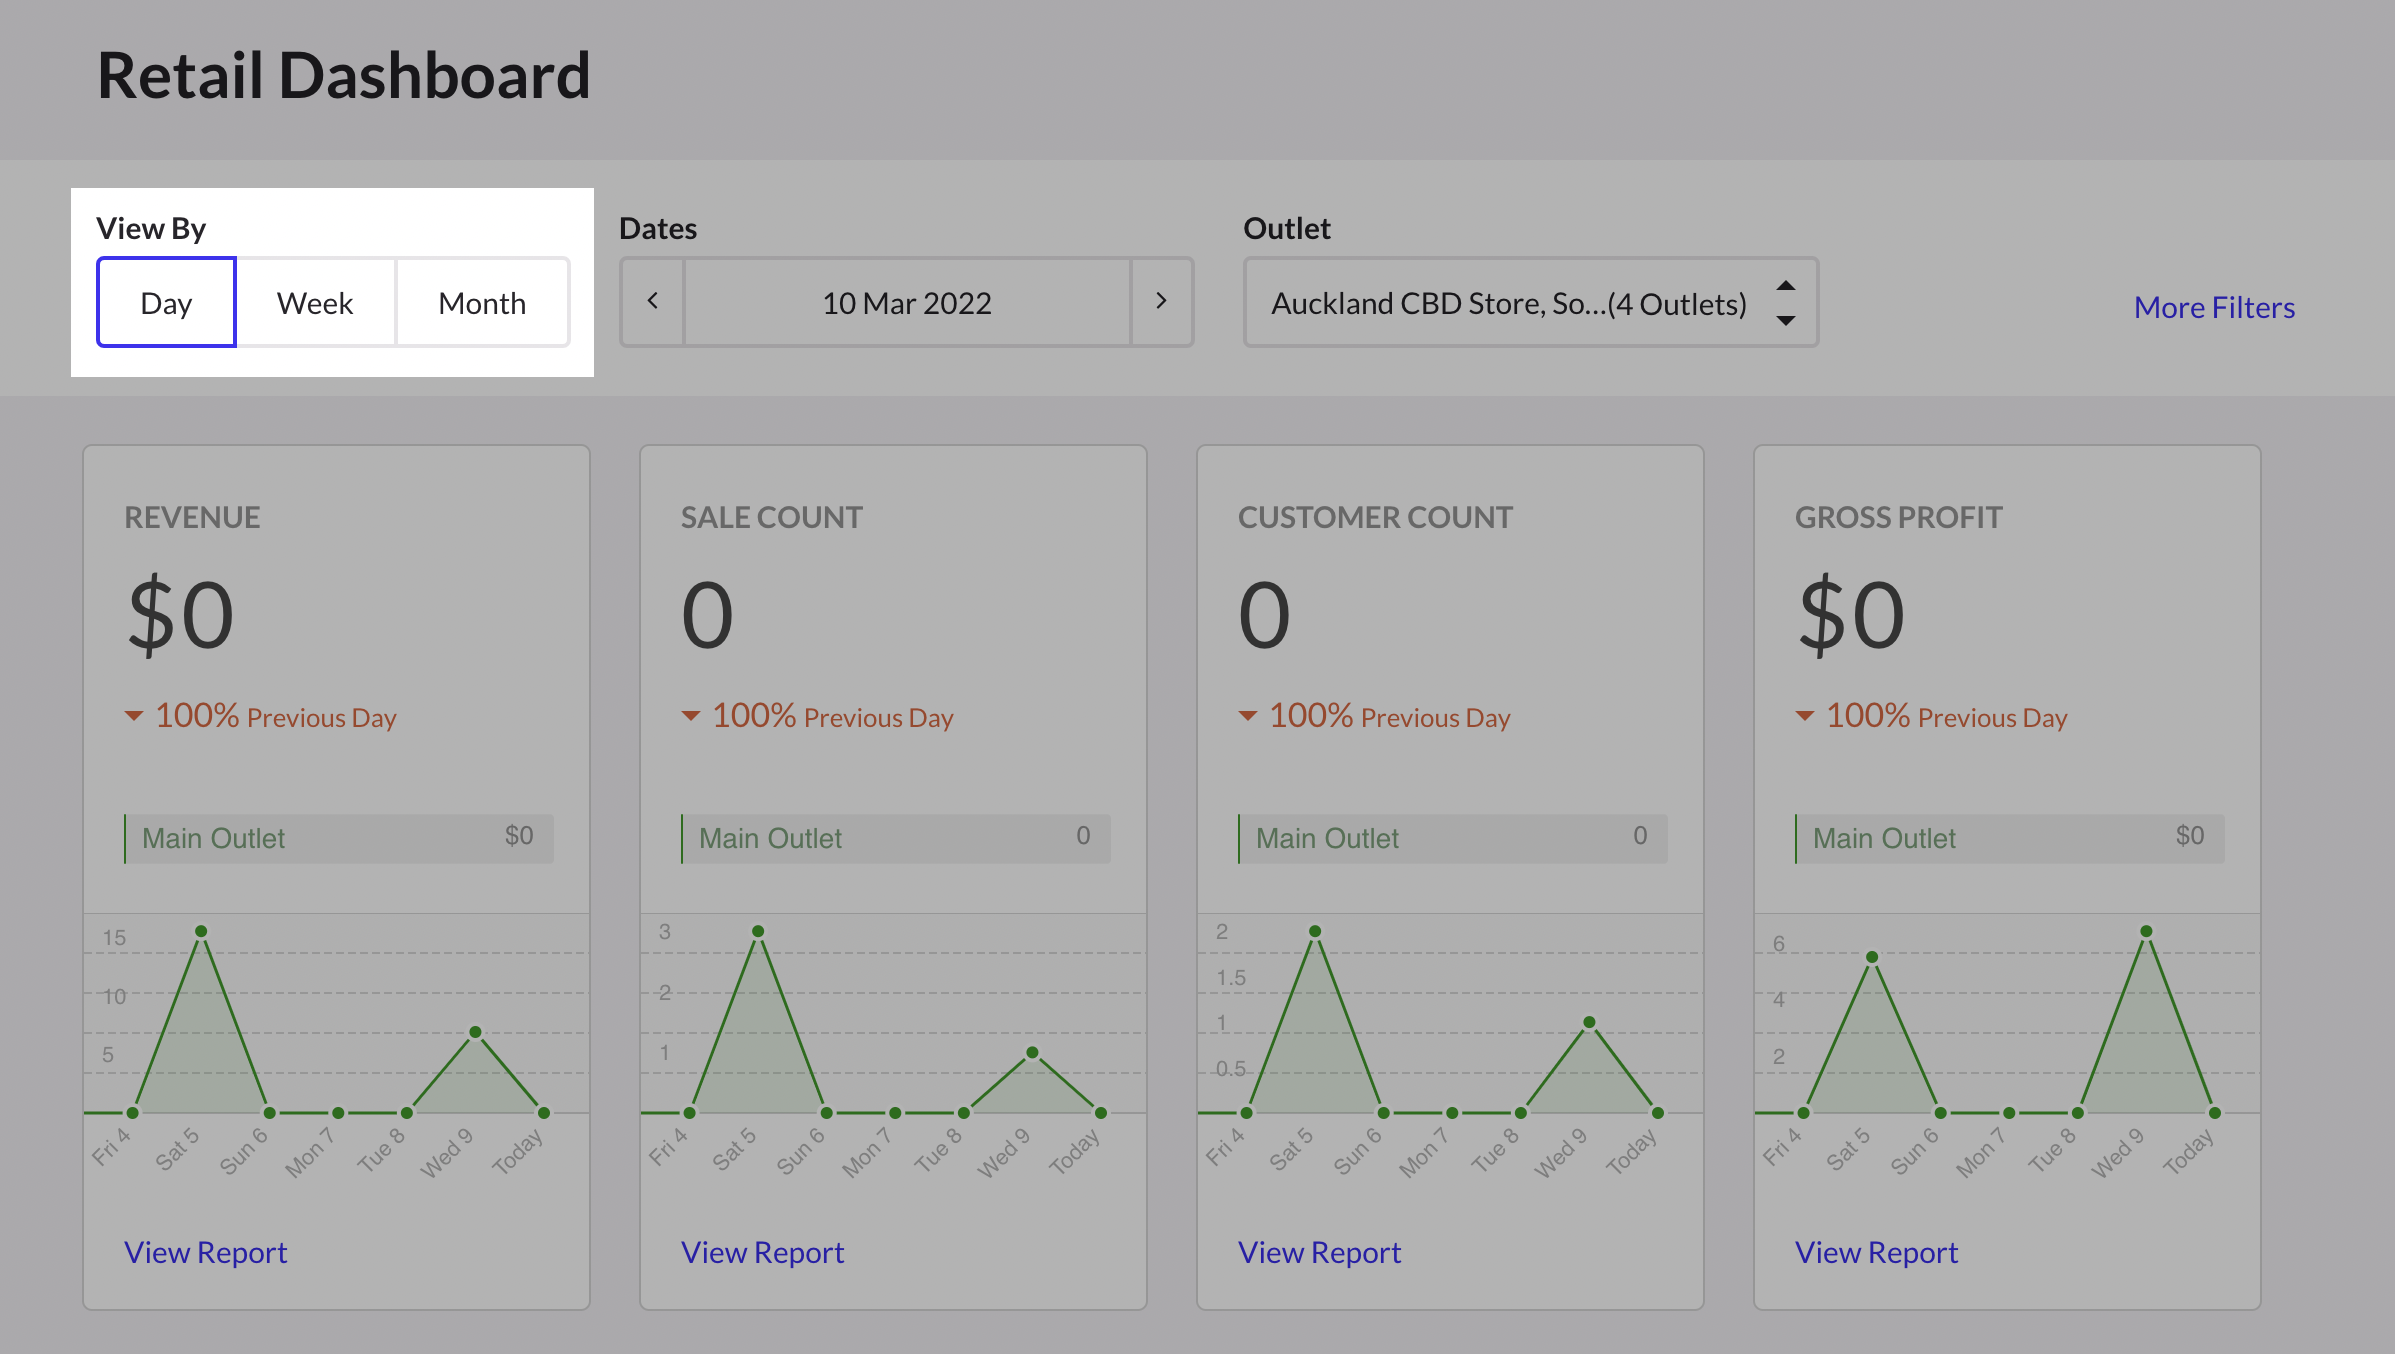 Retail-Dashboard-View-By.png